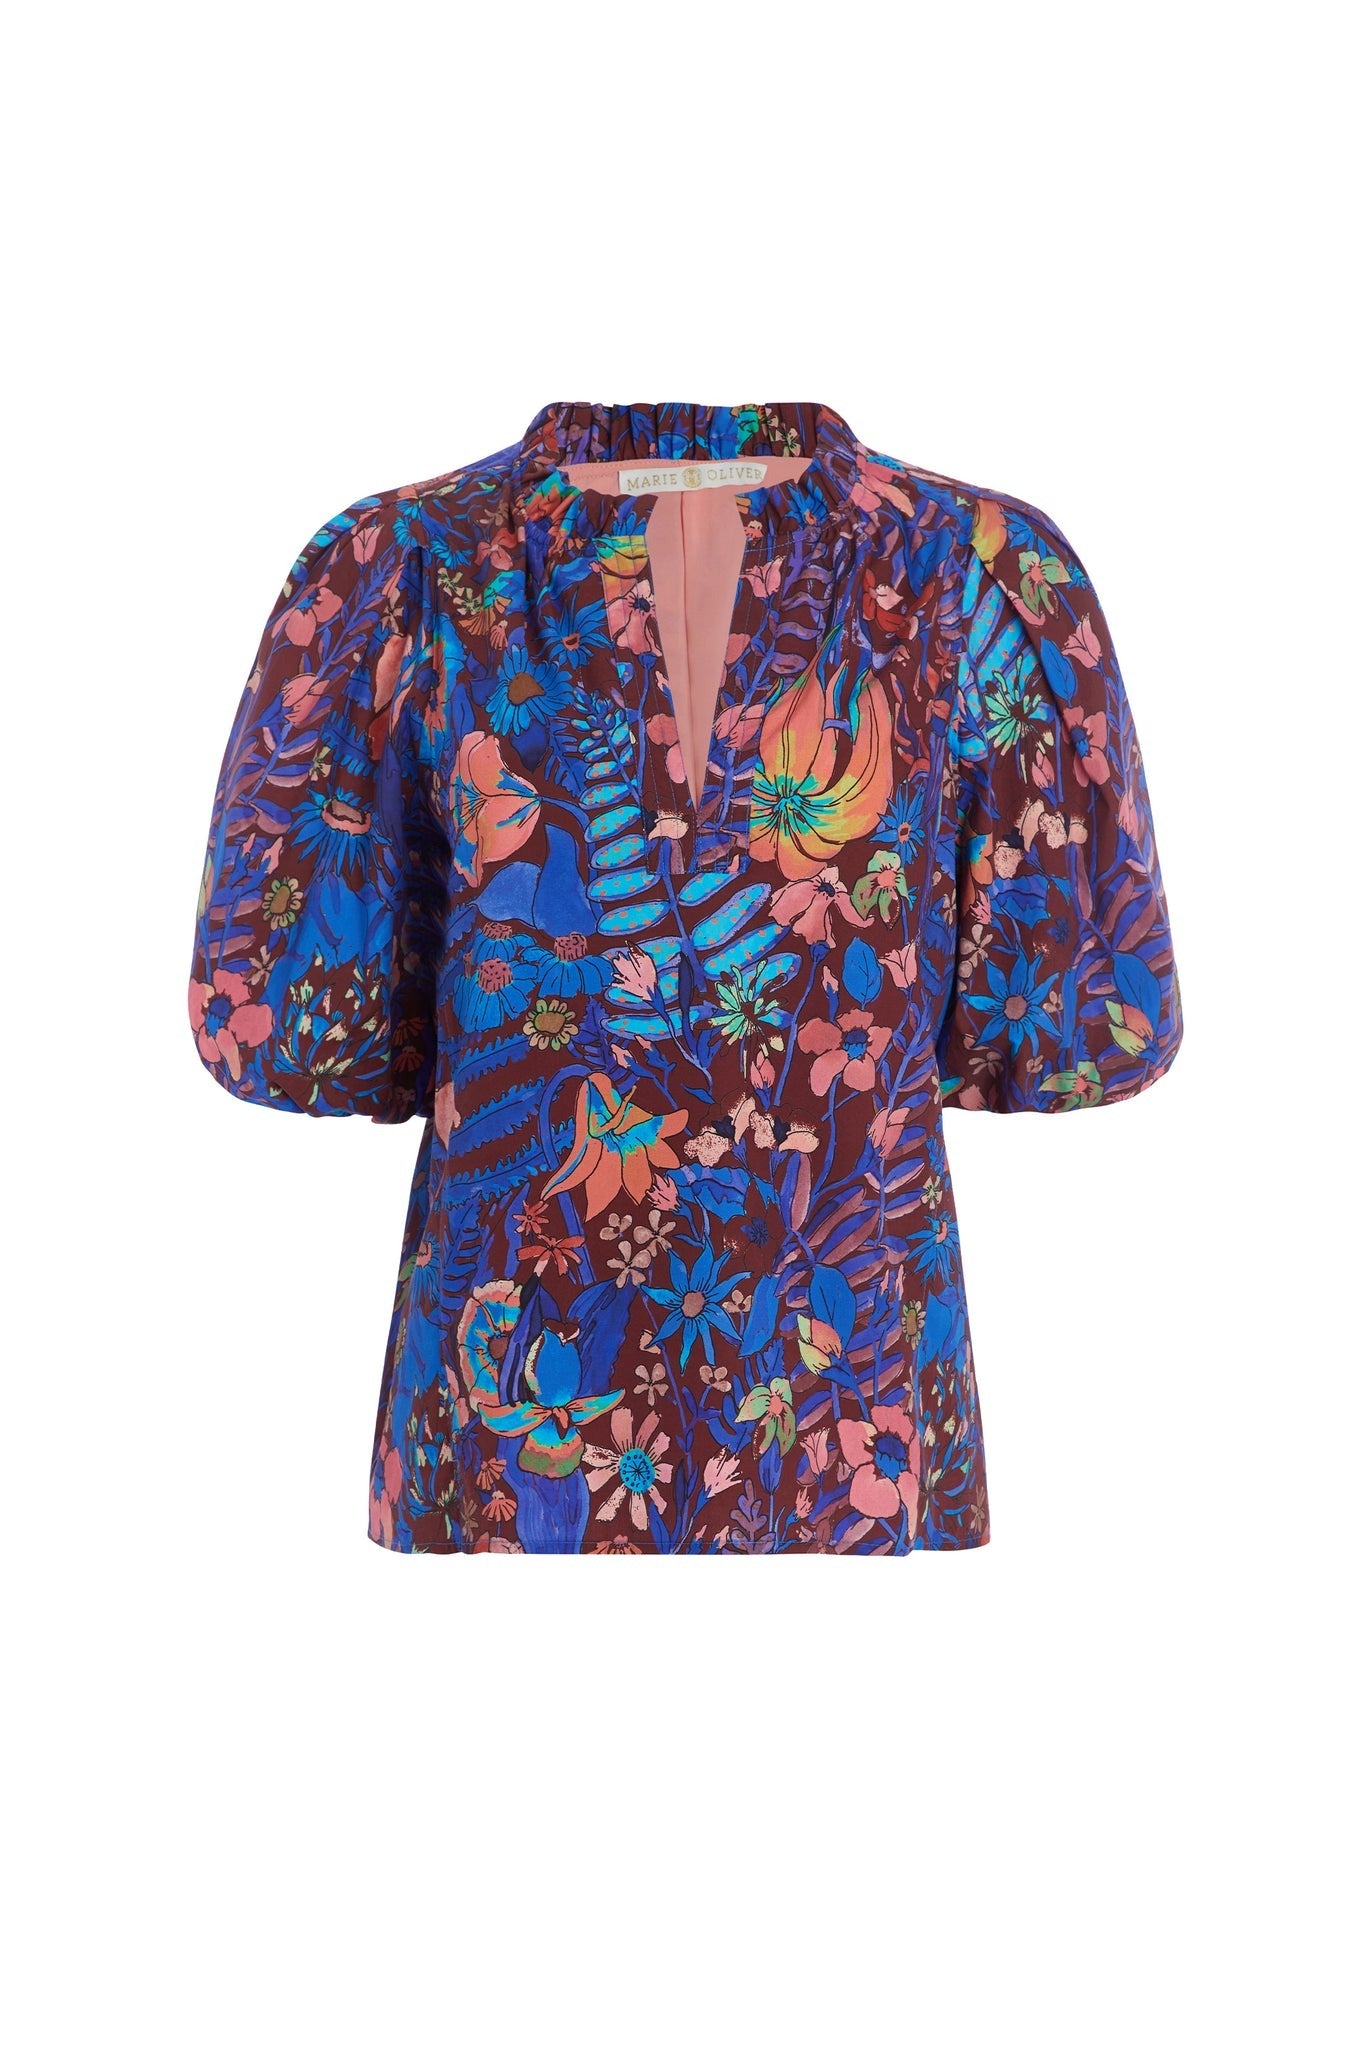 Ambrose Top in Peacock Floral